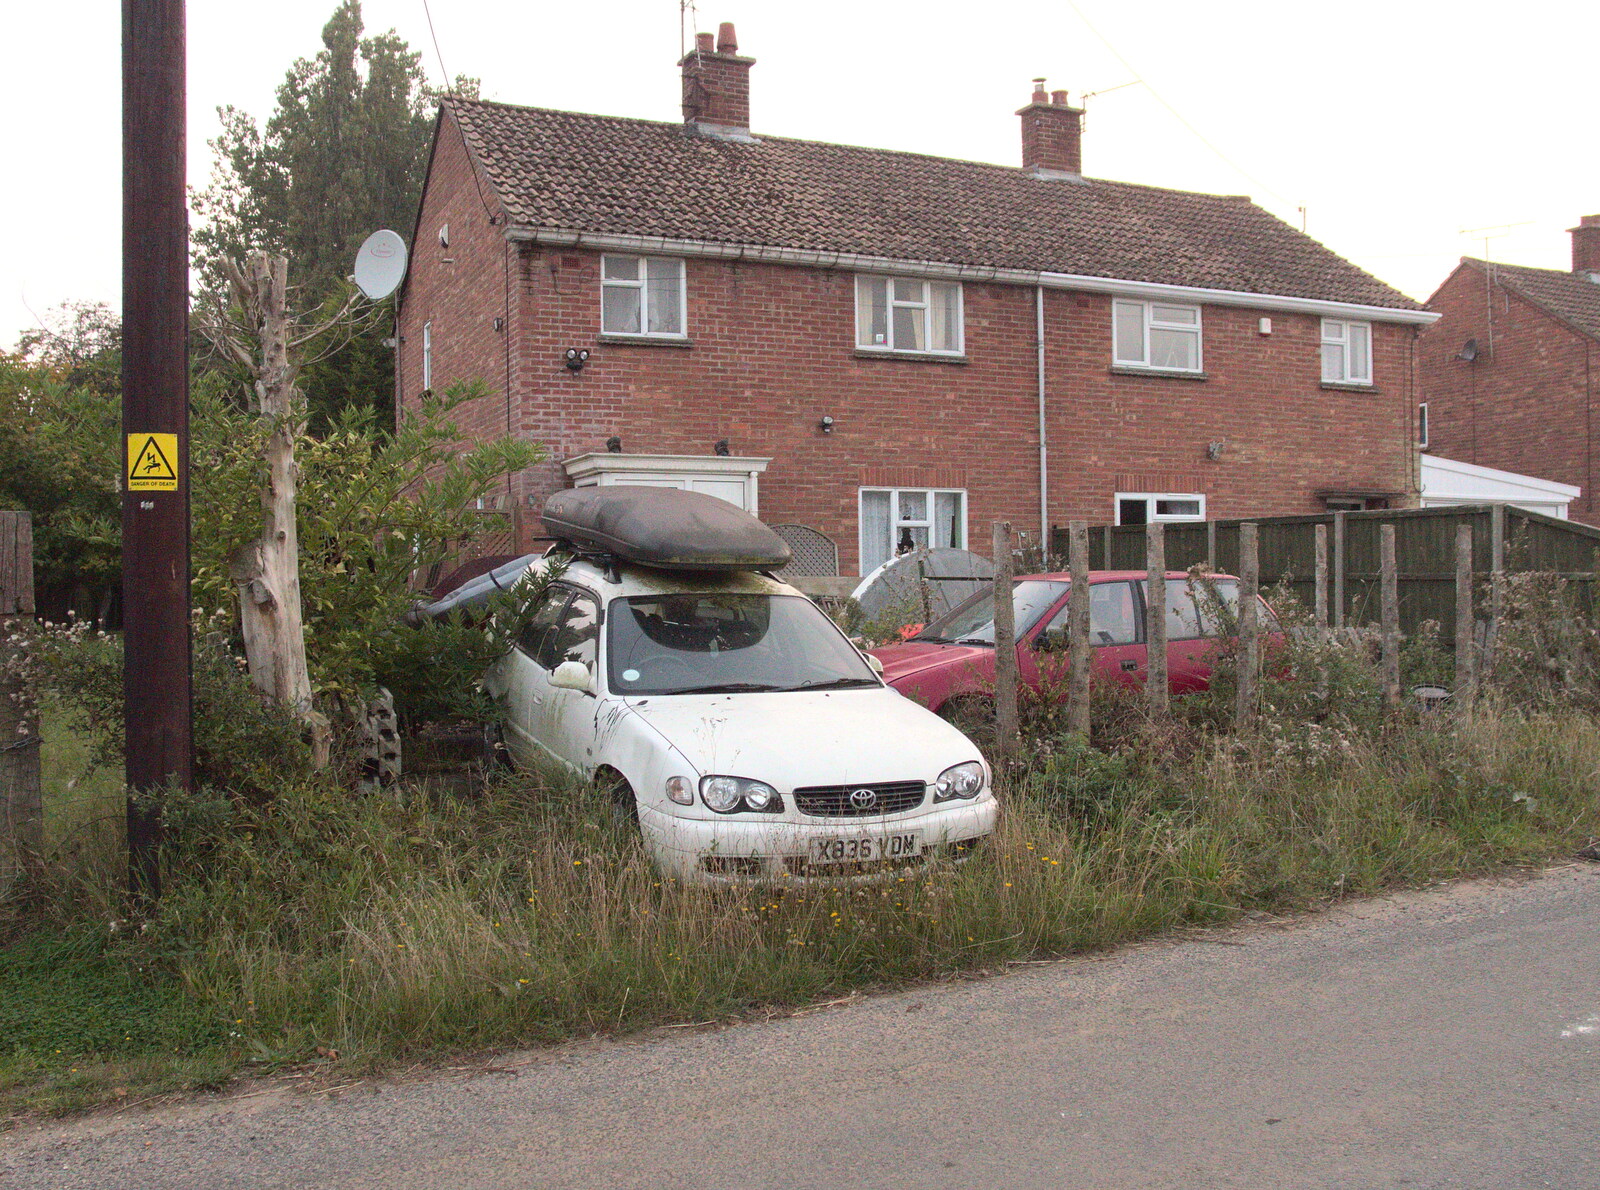 A derelict car in Brome Street from Bike Rides and the BSCC at the Railway, Mellis and Brome, Suffolk - 18th September 2014